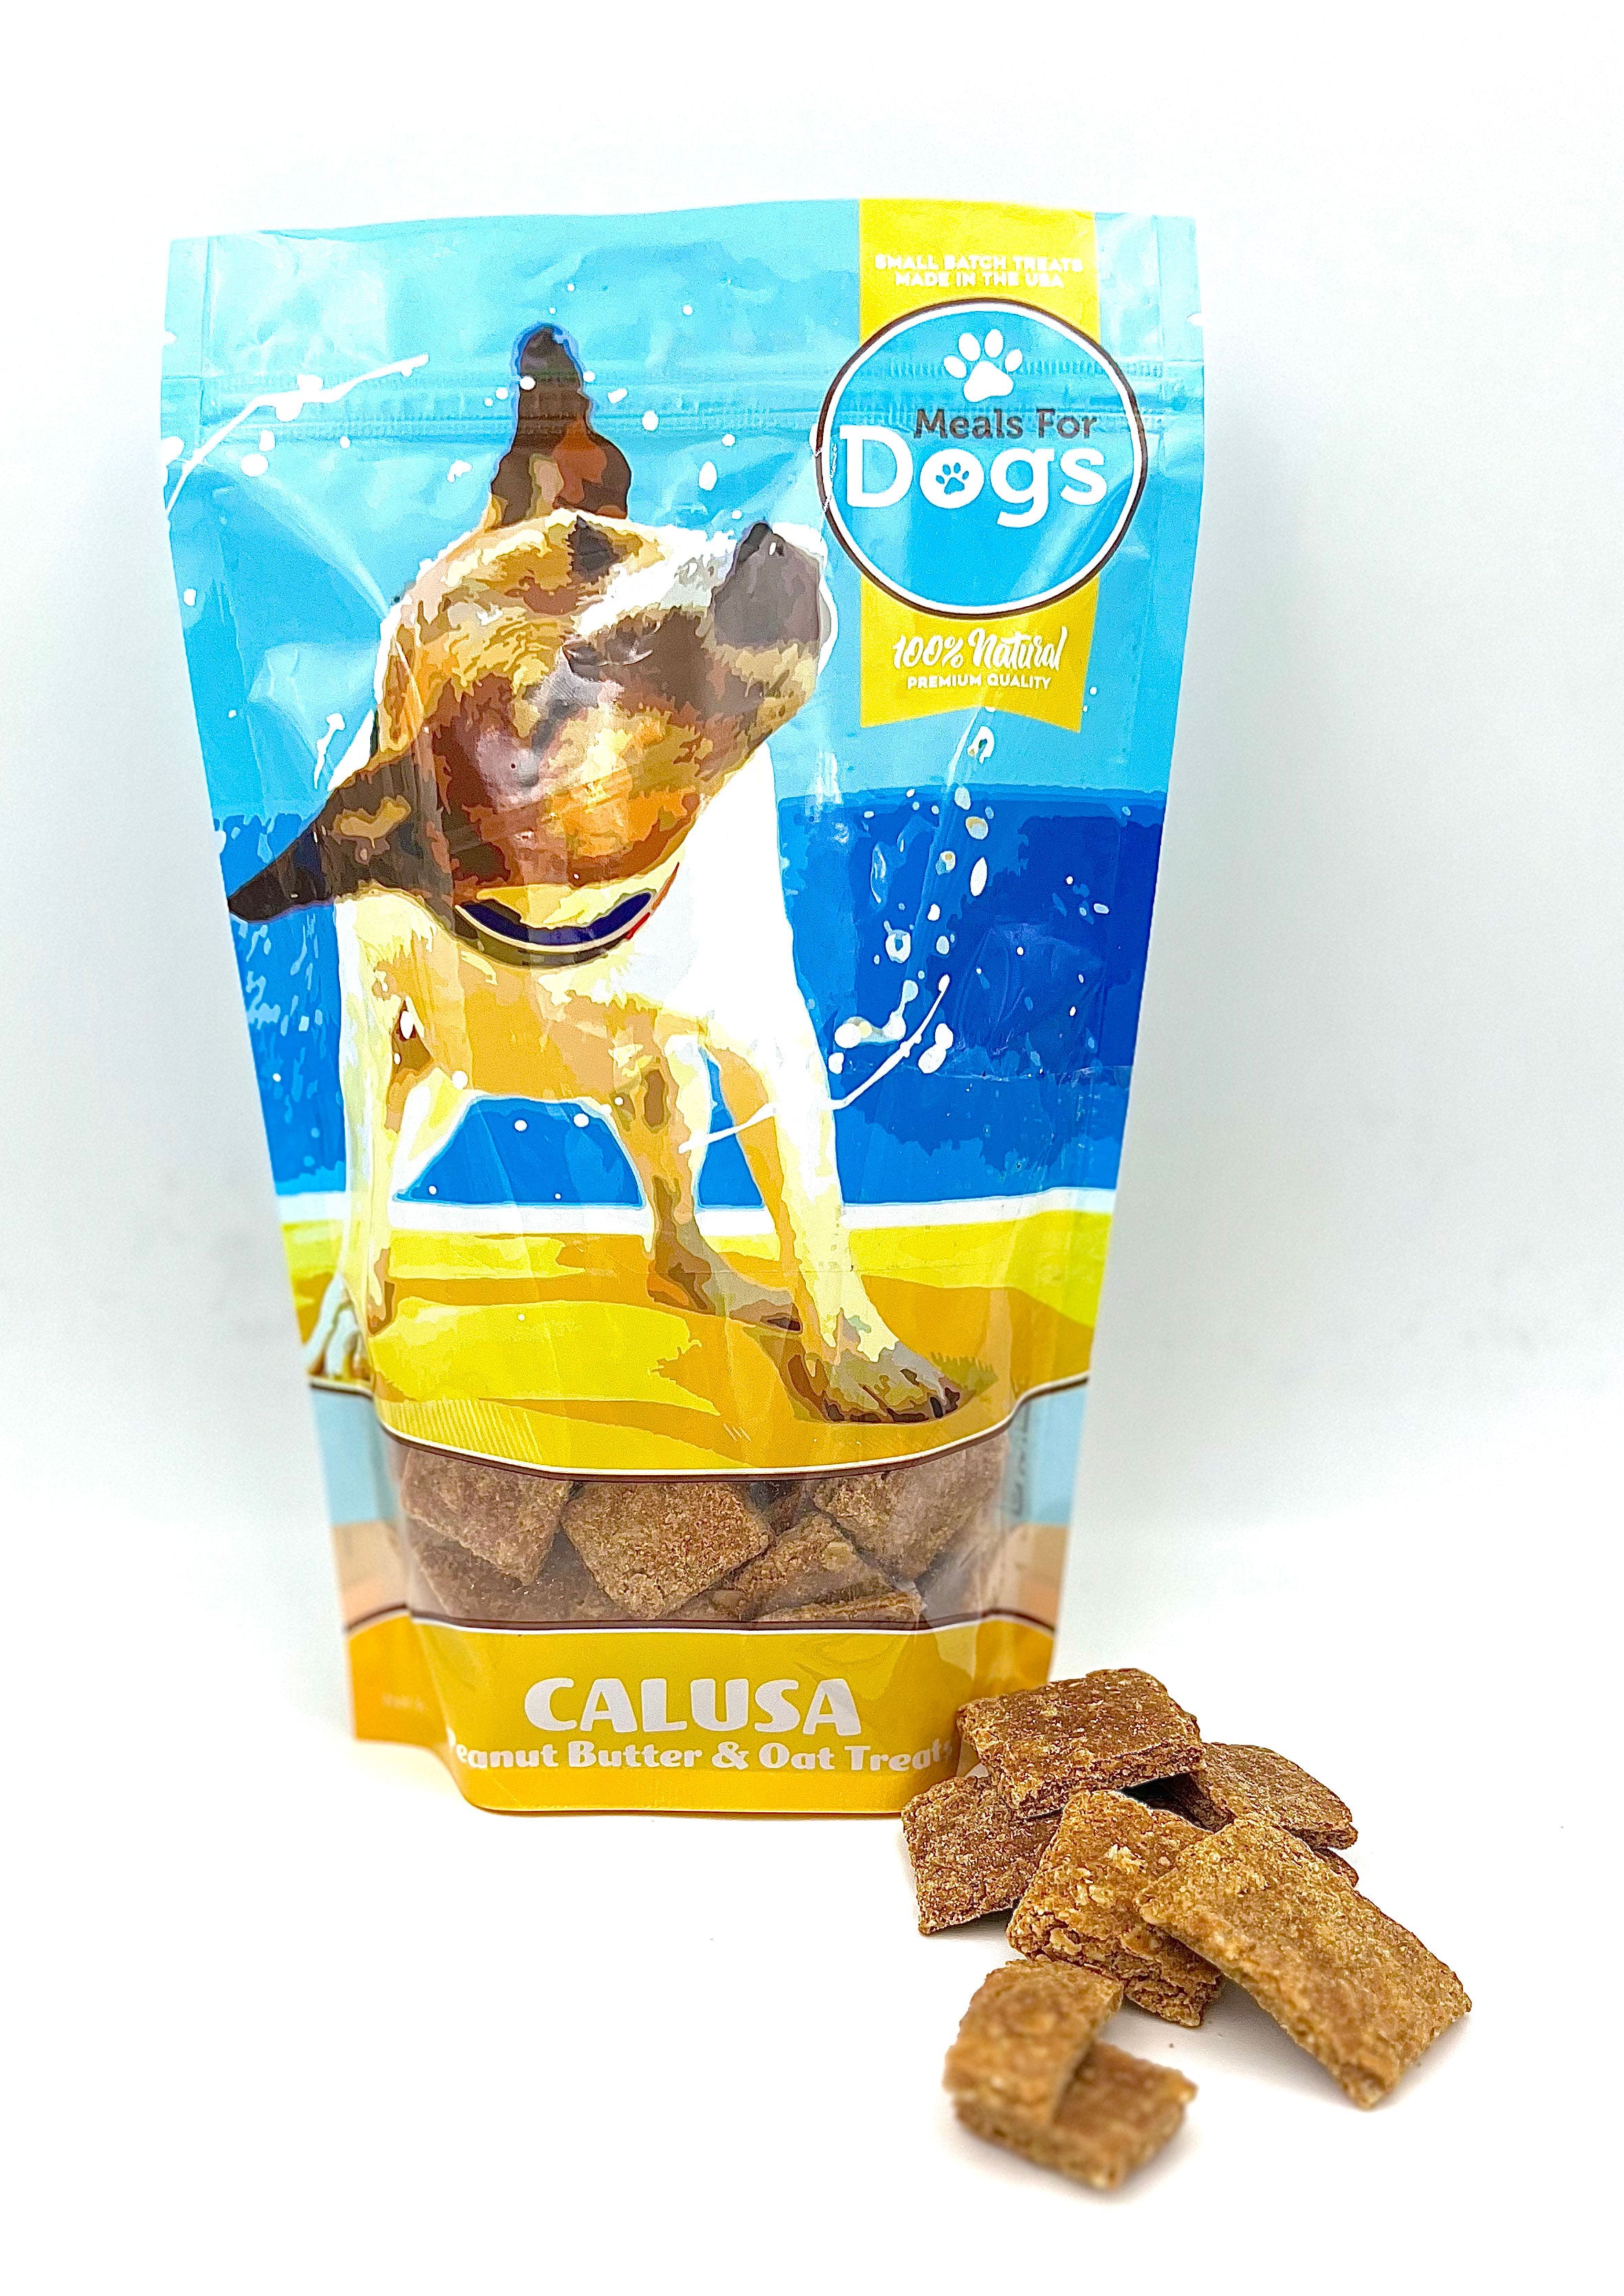 Calusa Cookies | Meals for Dogs